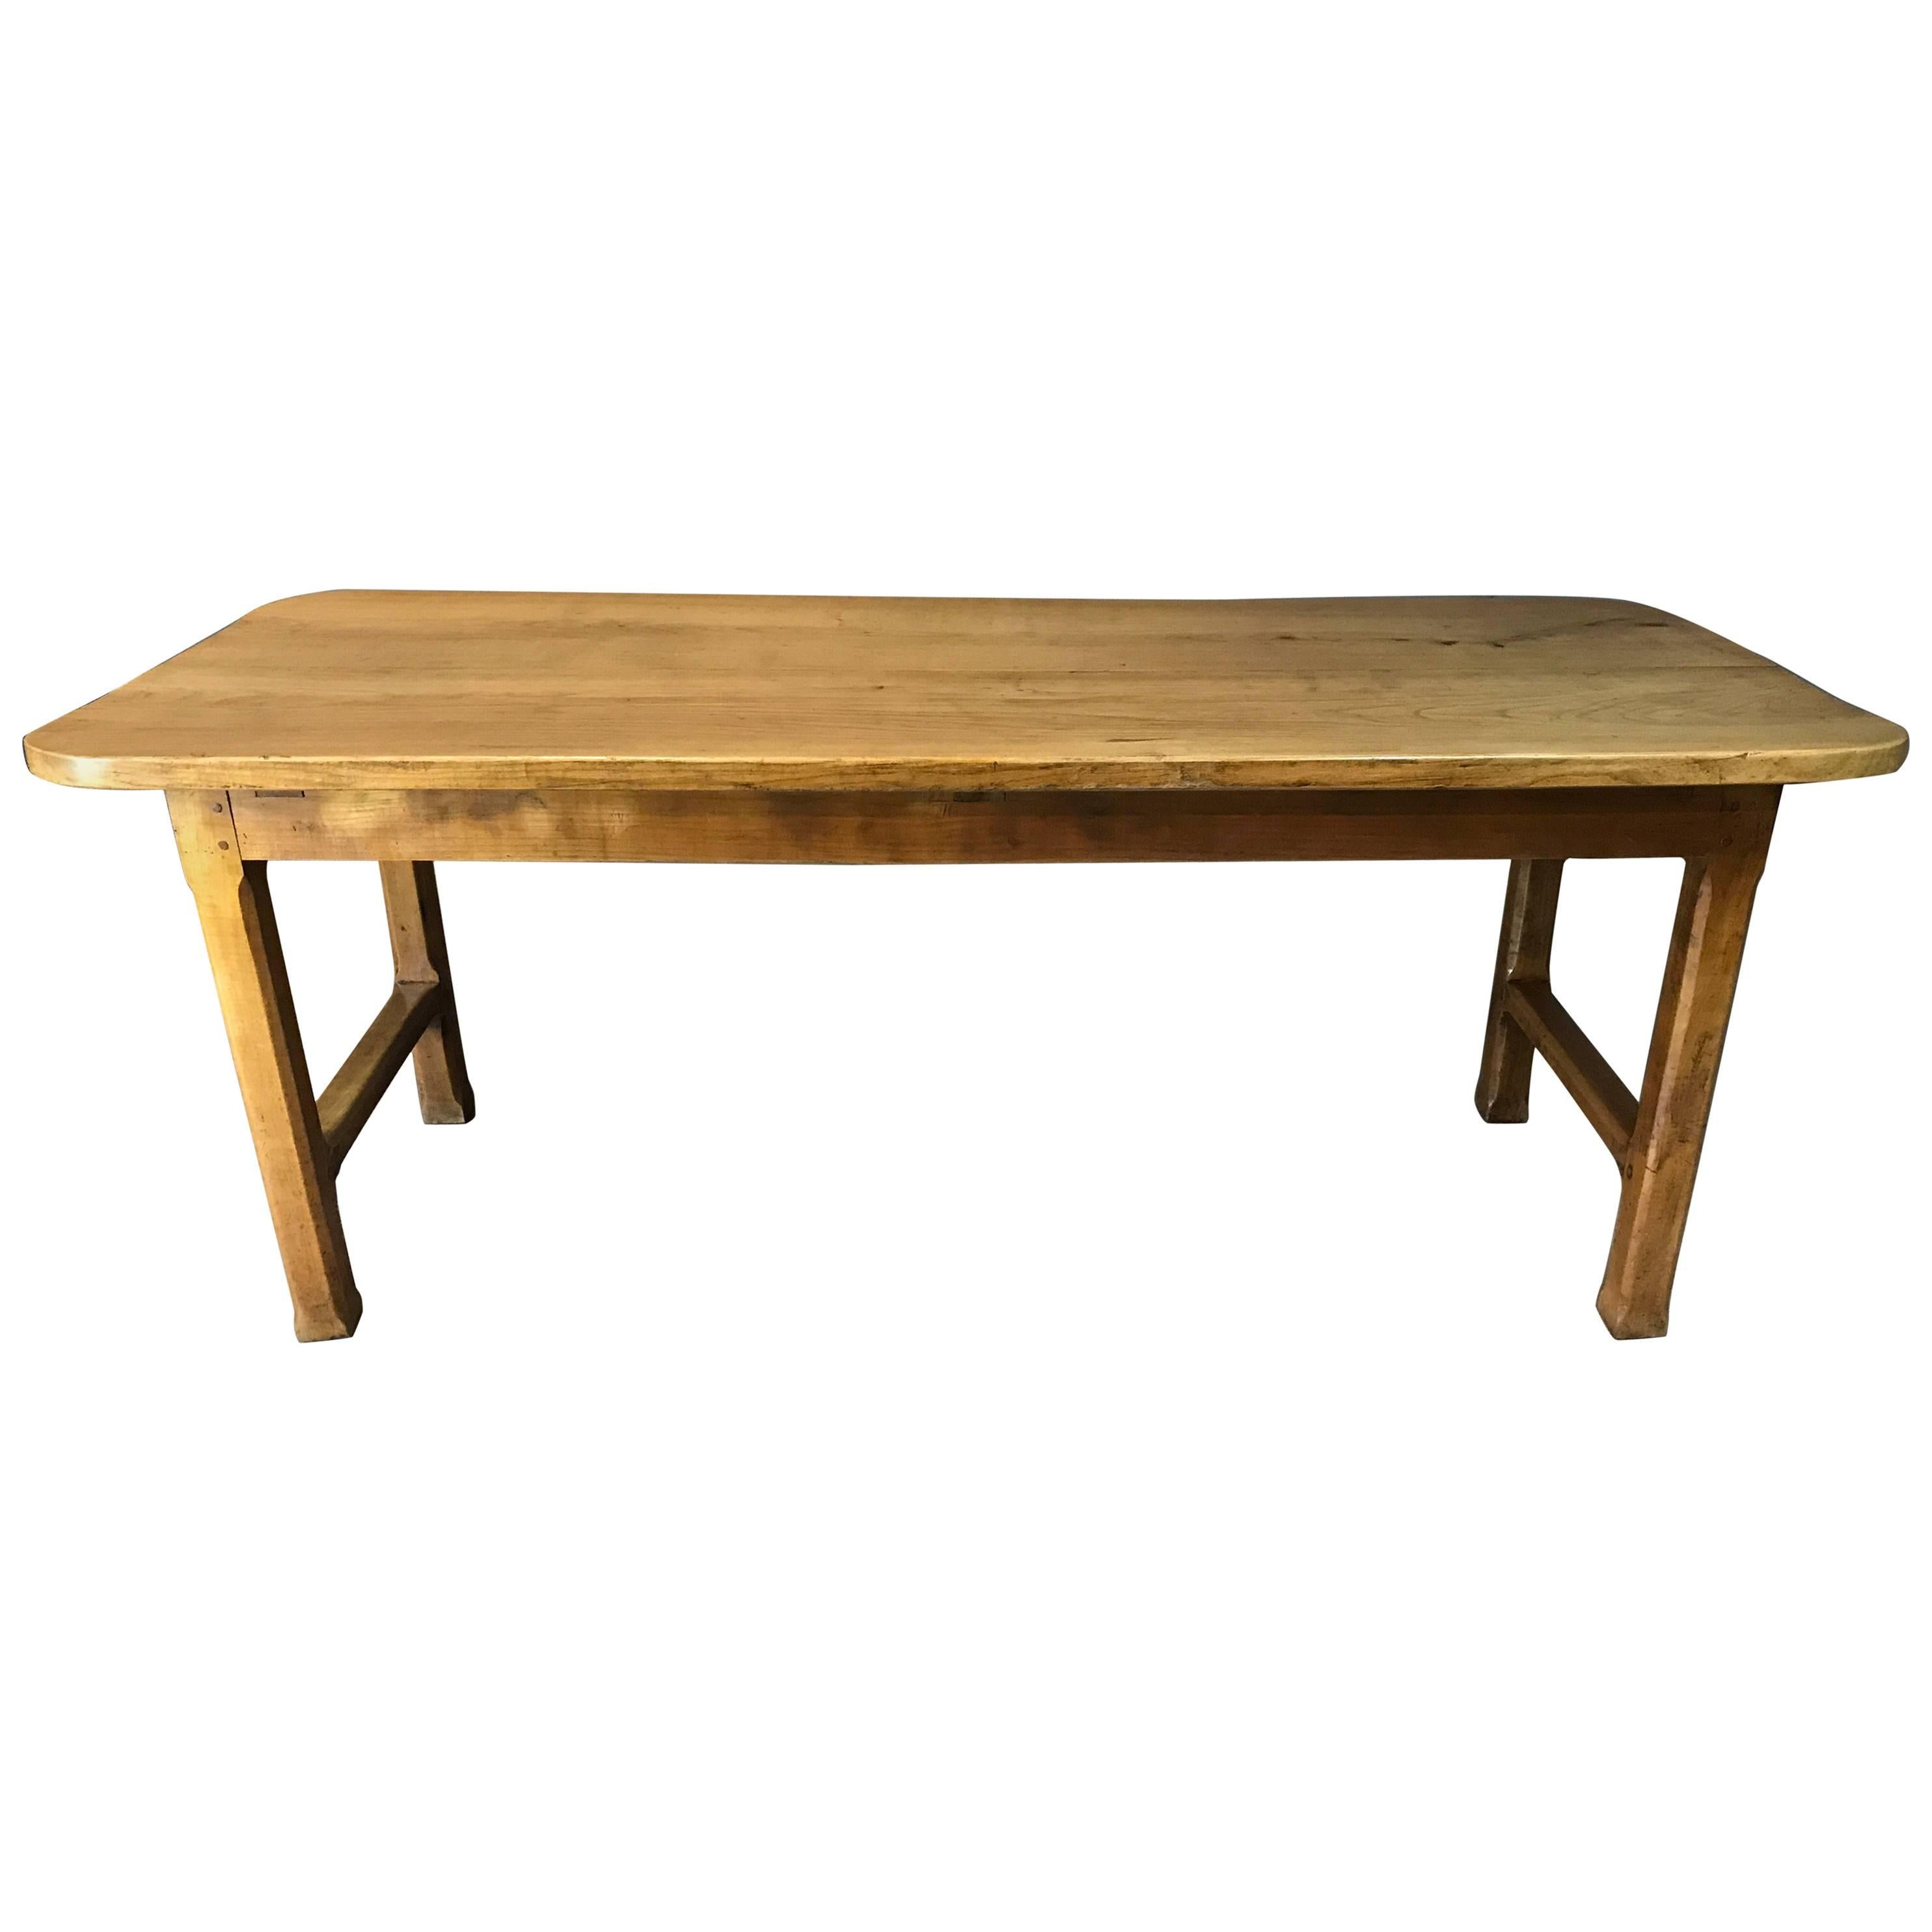 Antique Applewood Farmhouse Table with Centre Stretcher, circa 1840